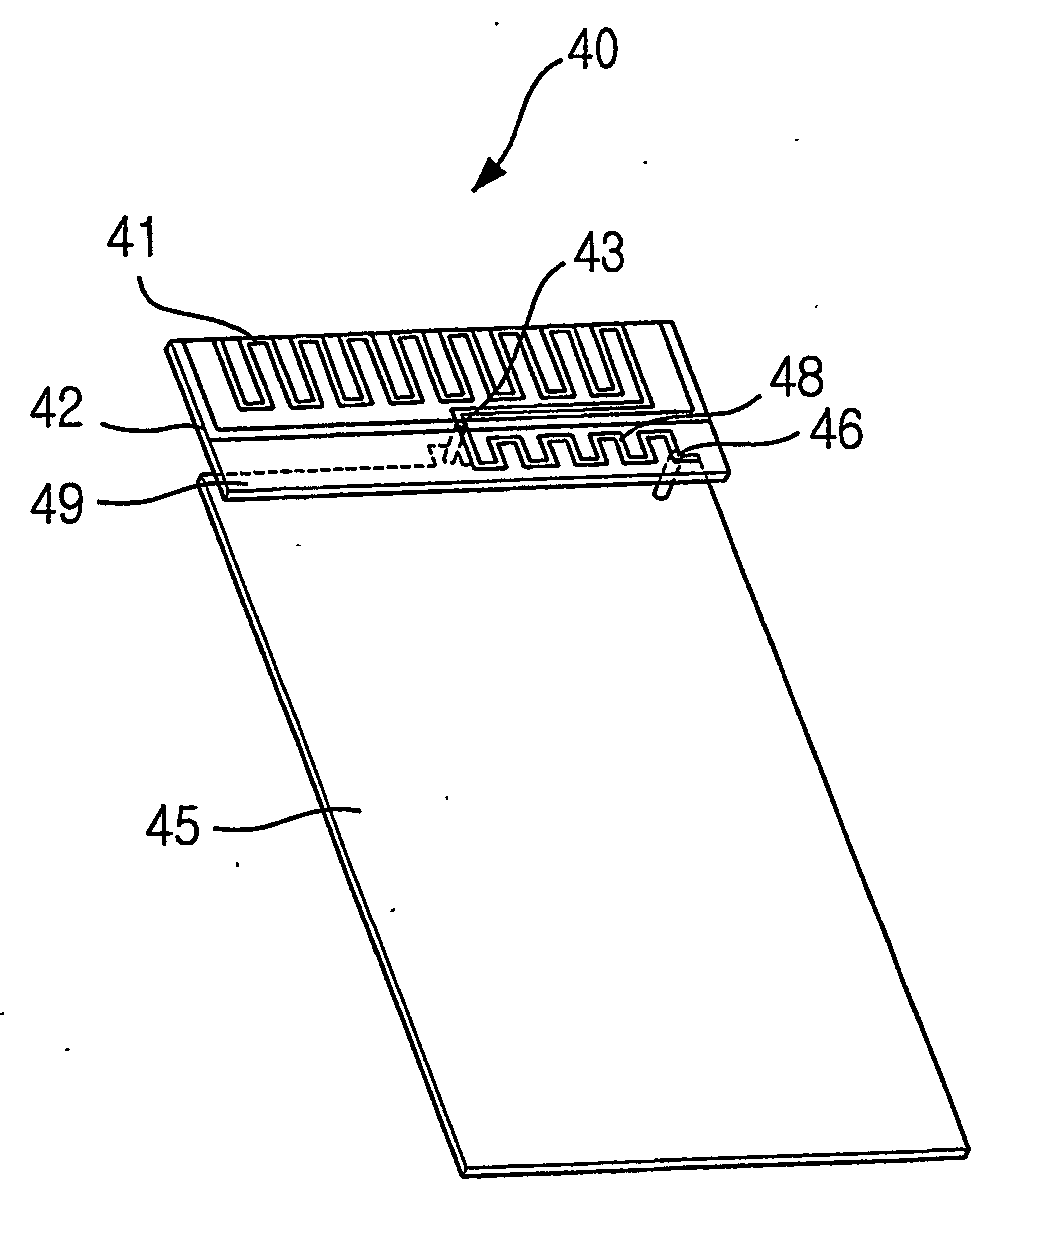 Built-in antenna having center feeding structure for wireless terminal